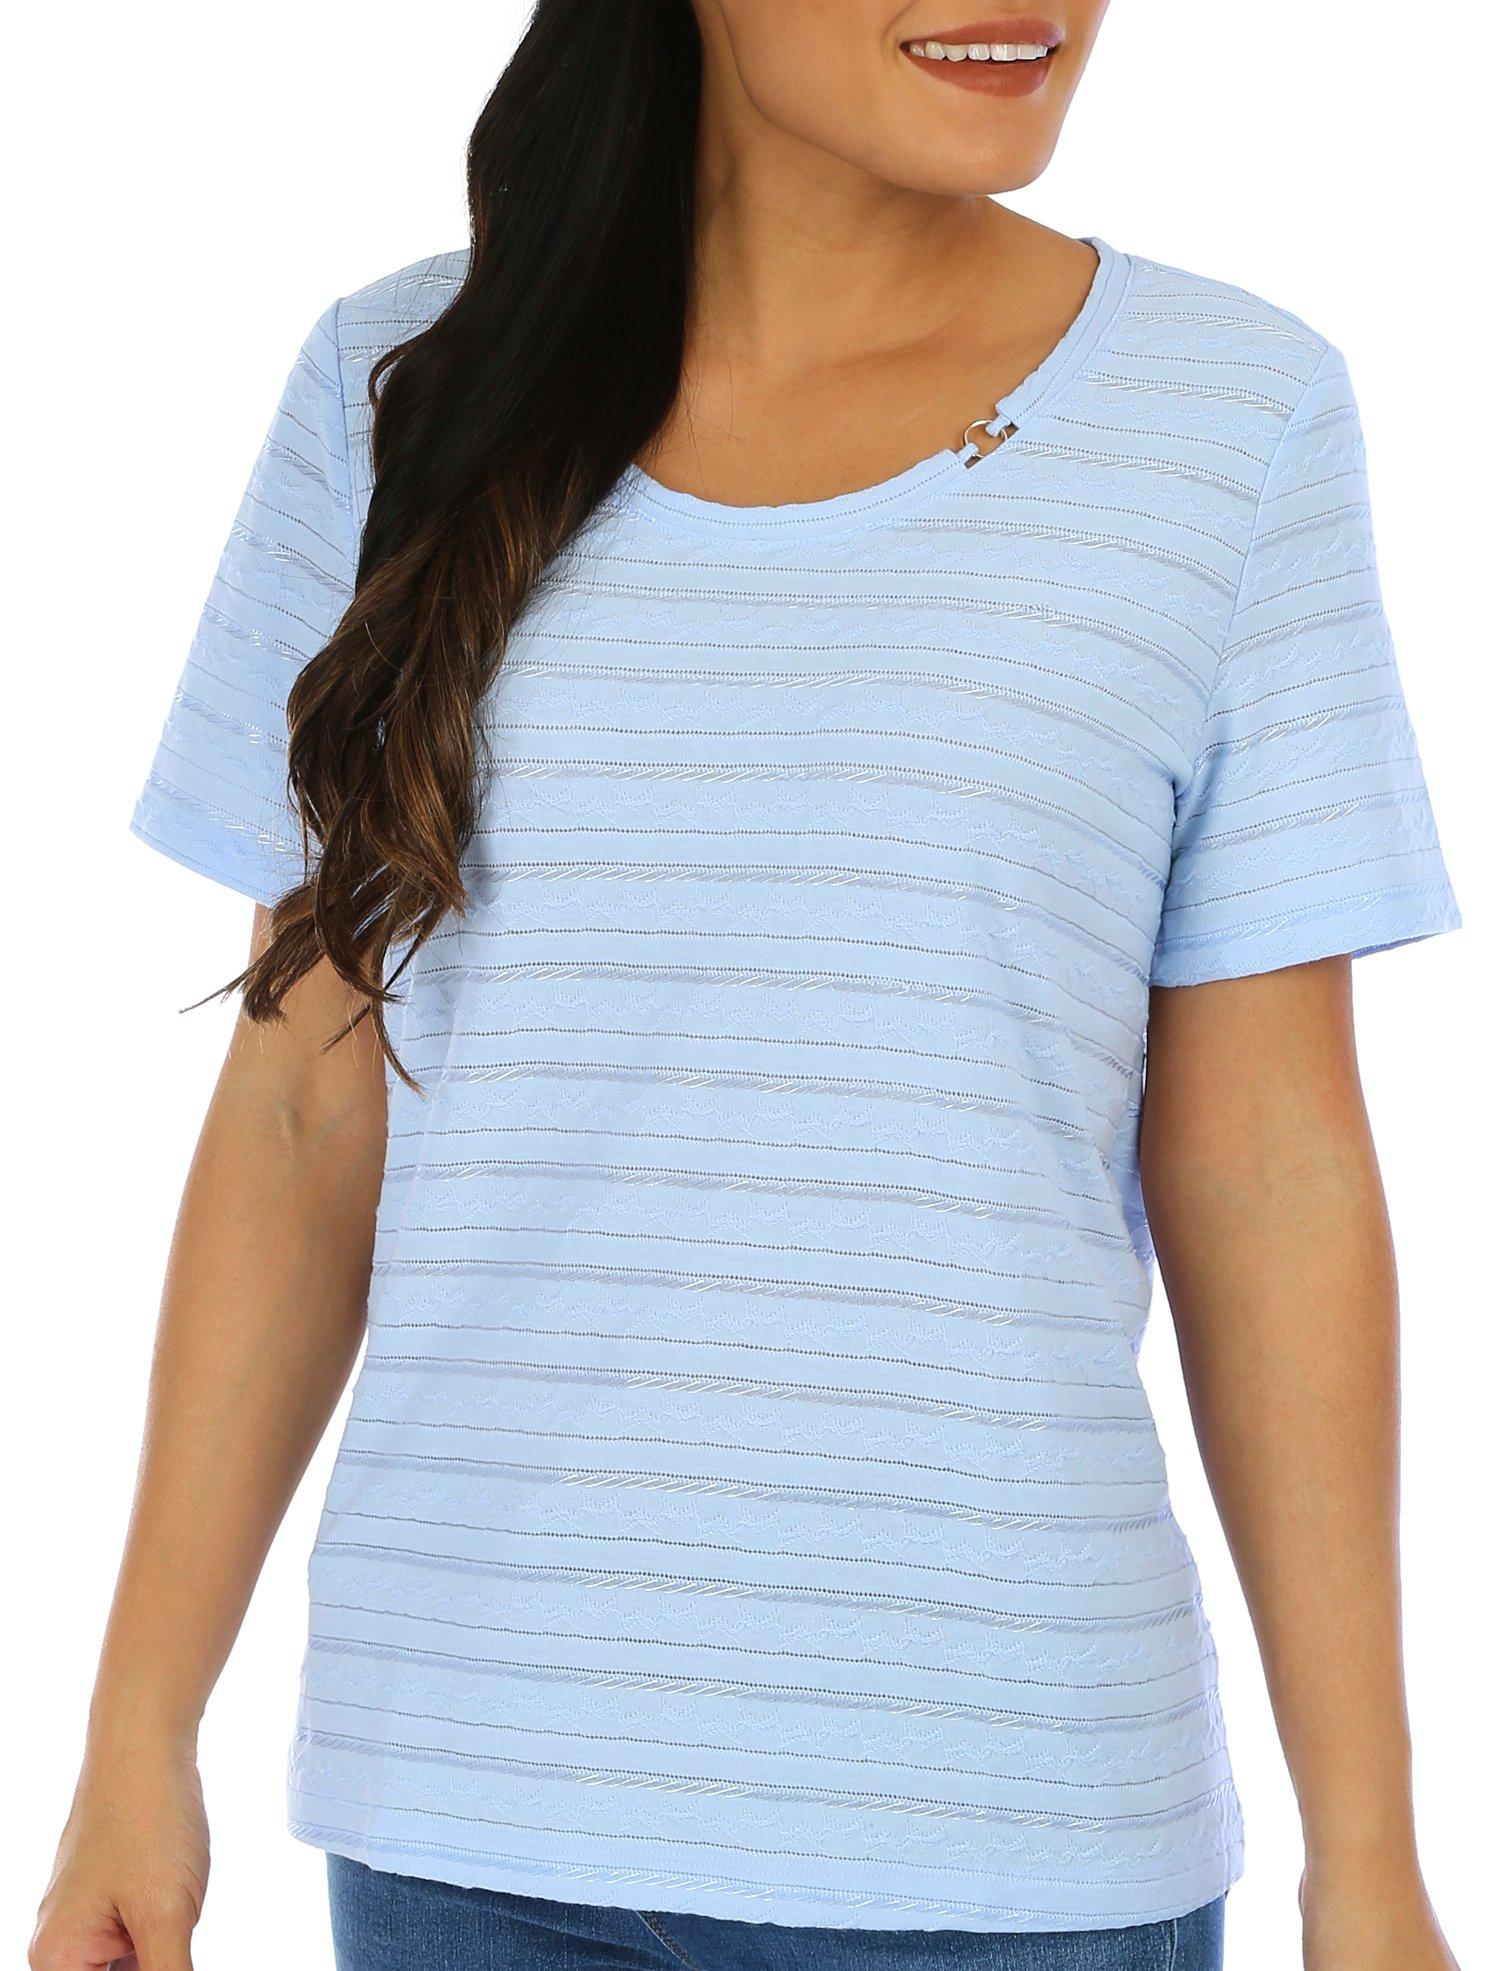 Coral Bay Womens Textured Stripe Short Sleeve Top